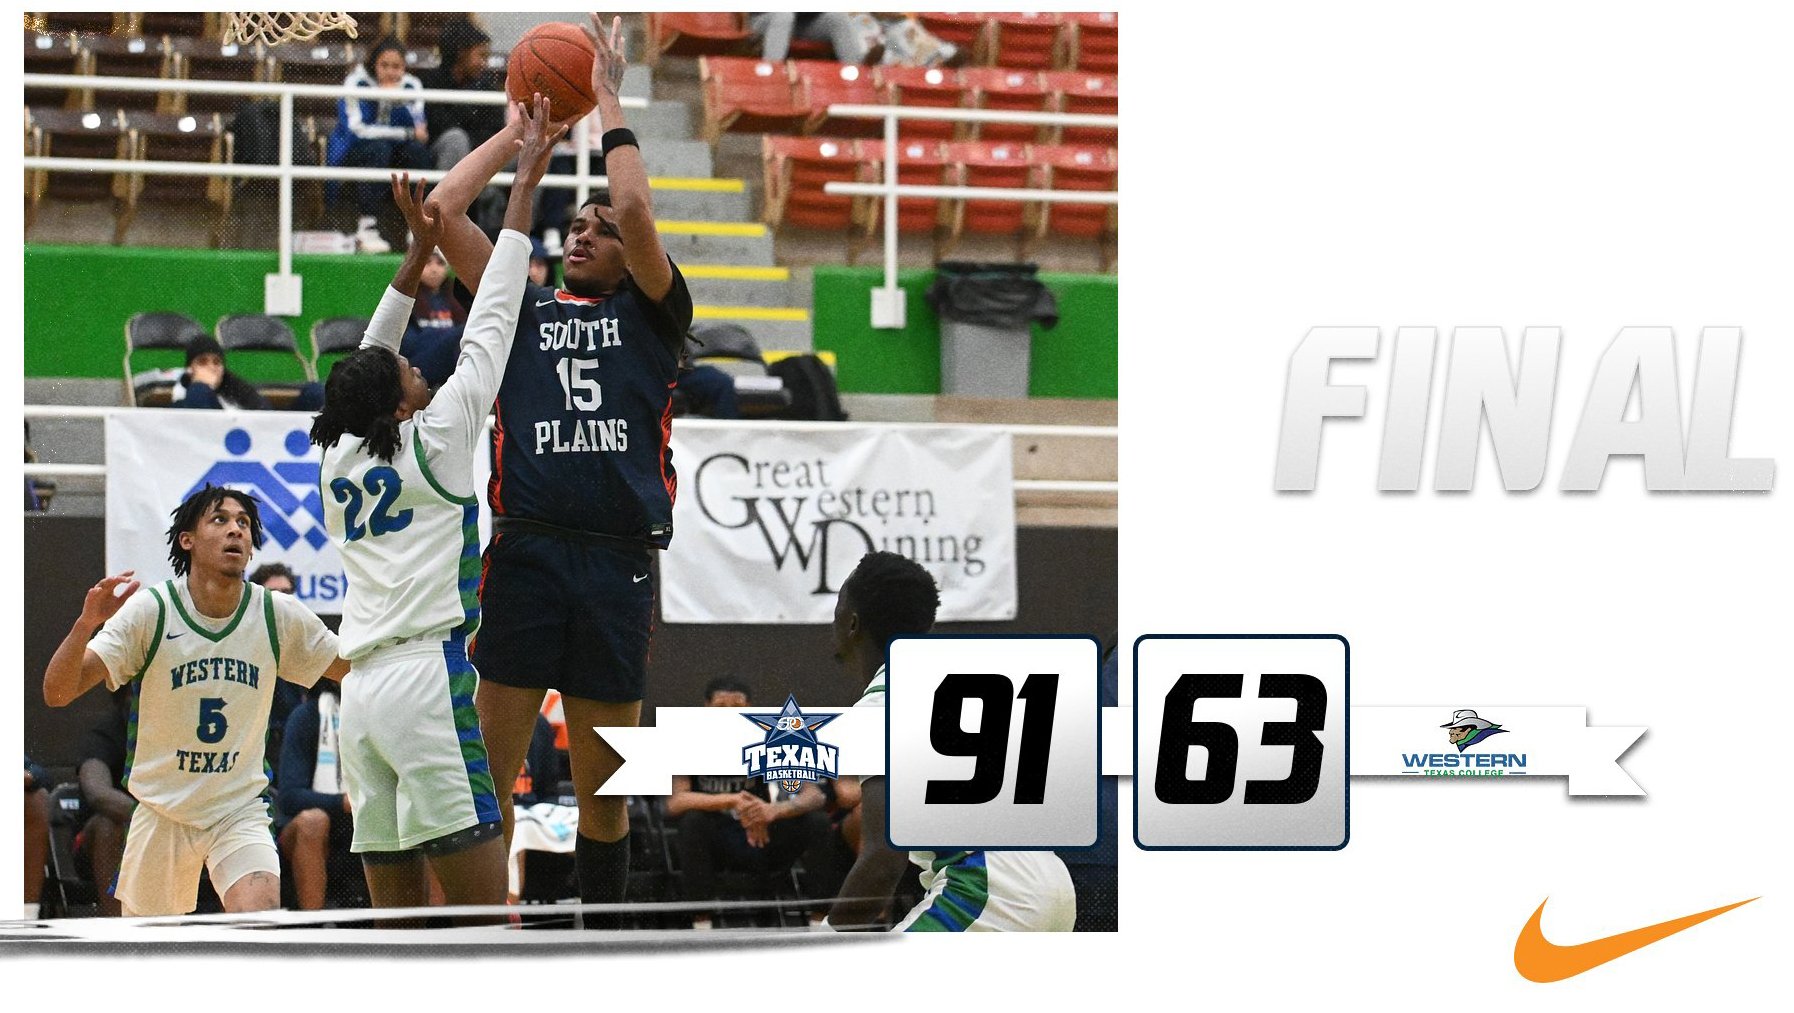 #1 Texans rout Western Texas 91-63 Monday, improve to 17-0